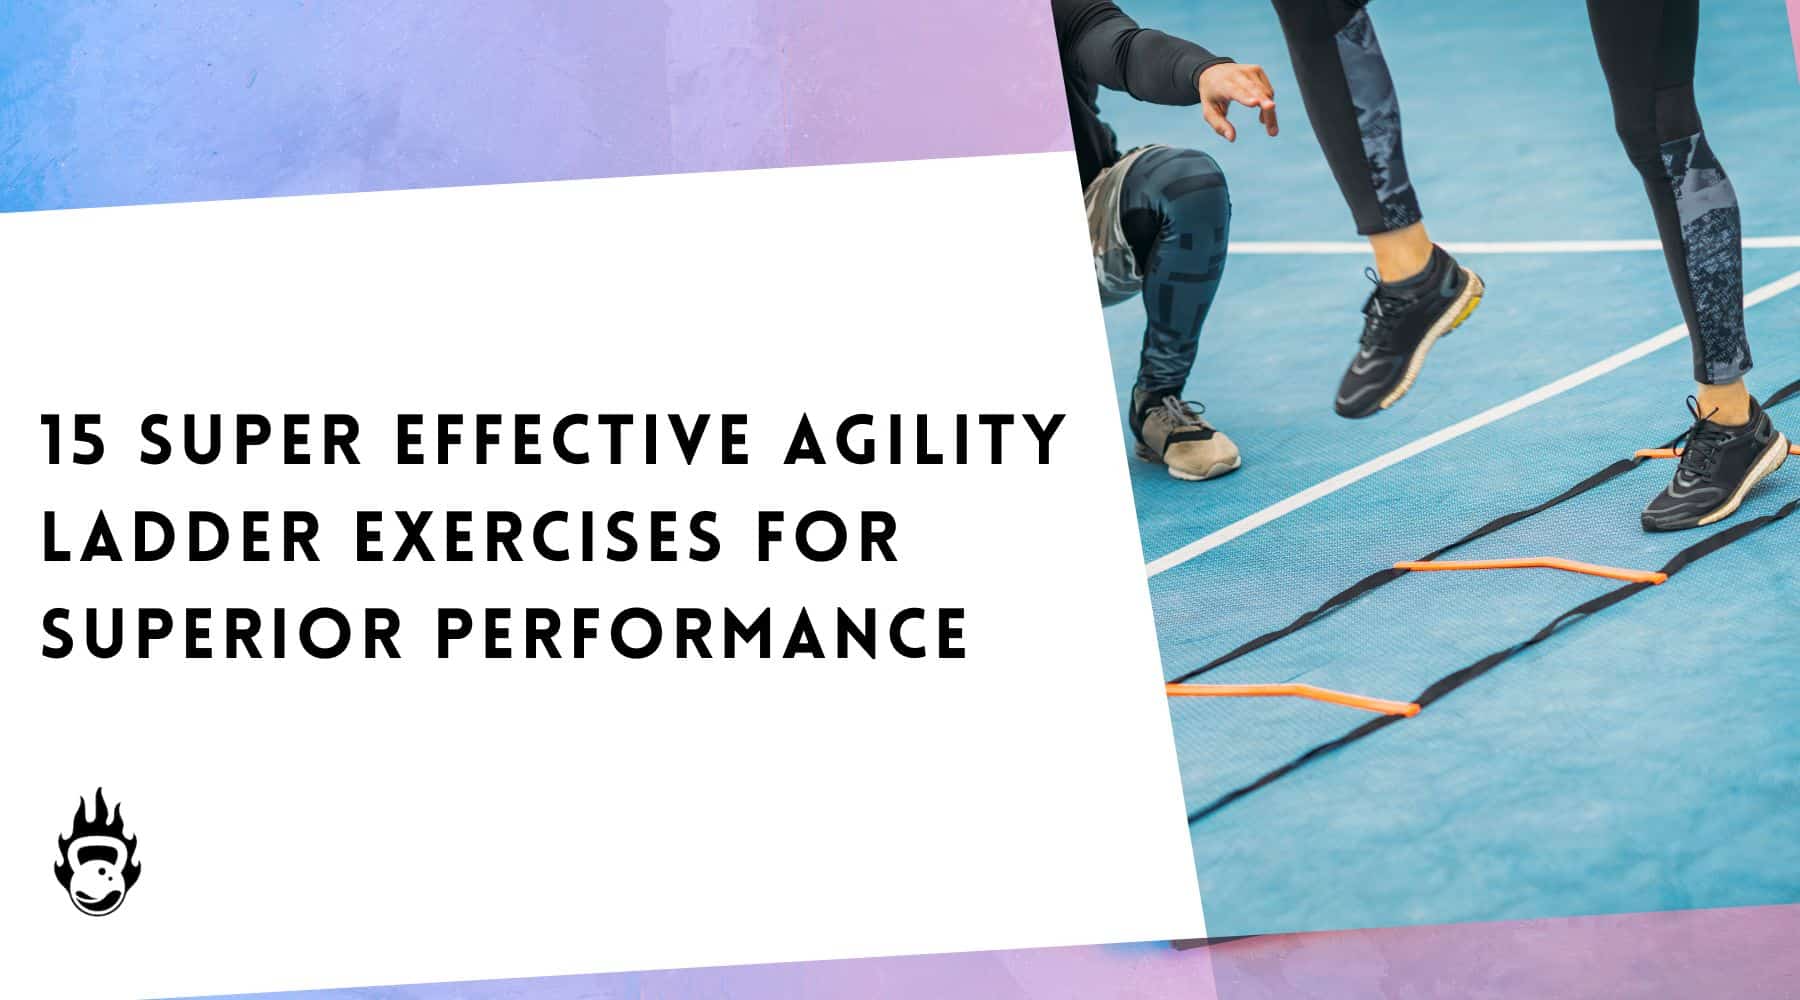 Cross-Training for Runners: Strength, Stability and Agility with